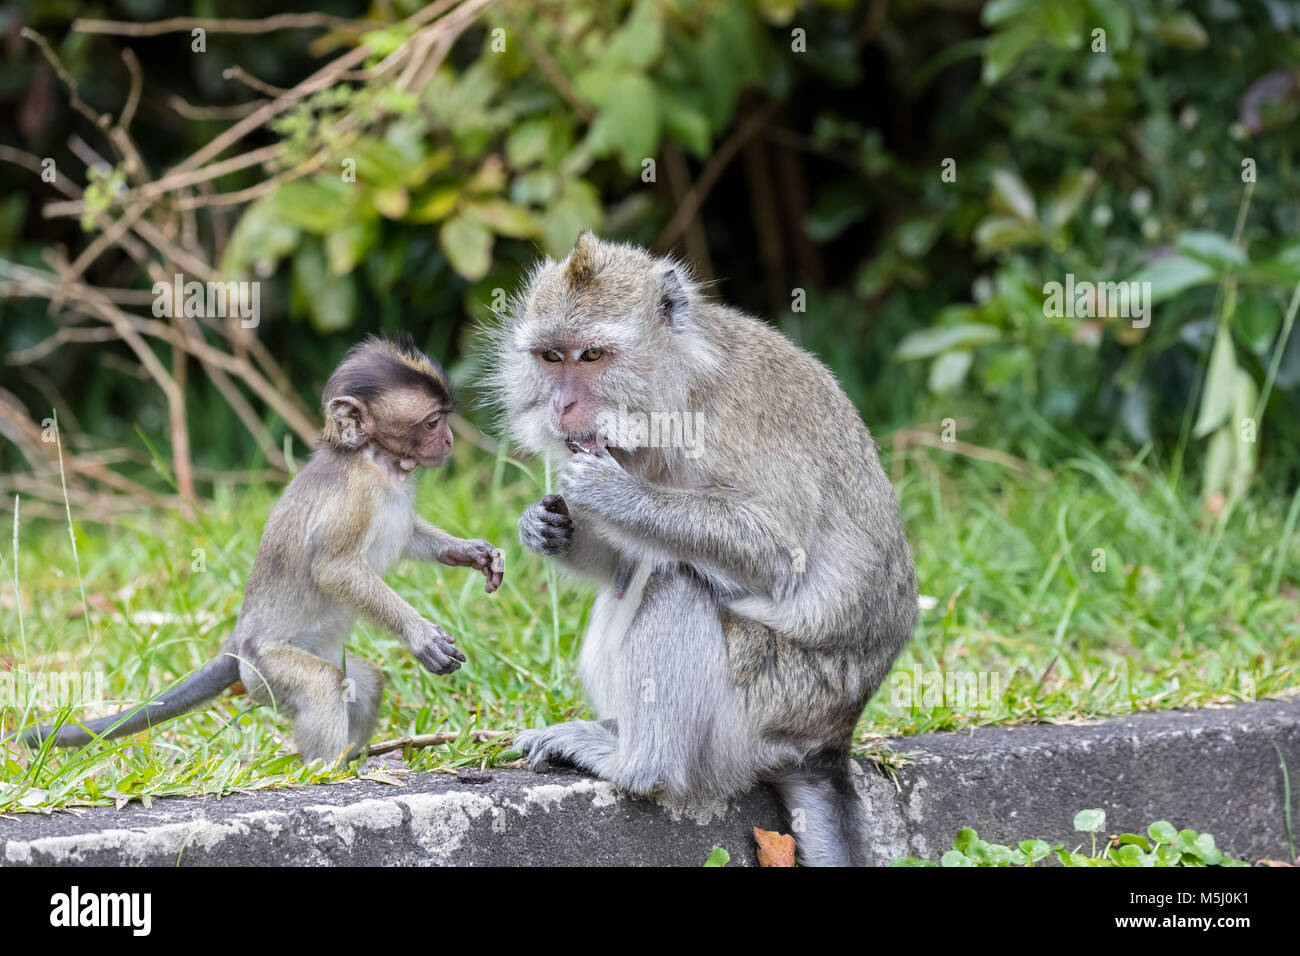 Mauritius, Black River Gorges National Park, Long-tailed macaque, Long-tailed Makaken, Mutter mit Jungtier Stockfoto